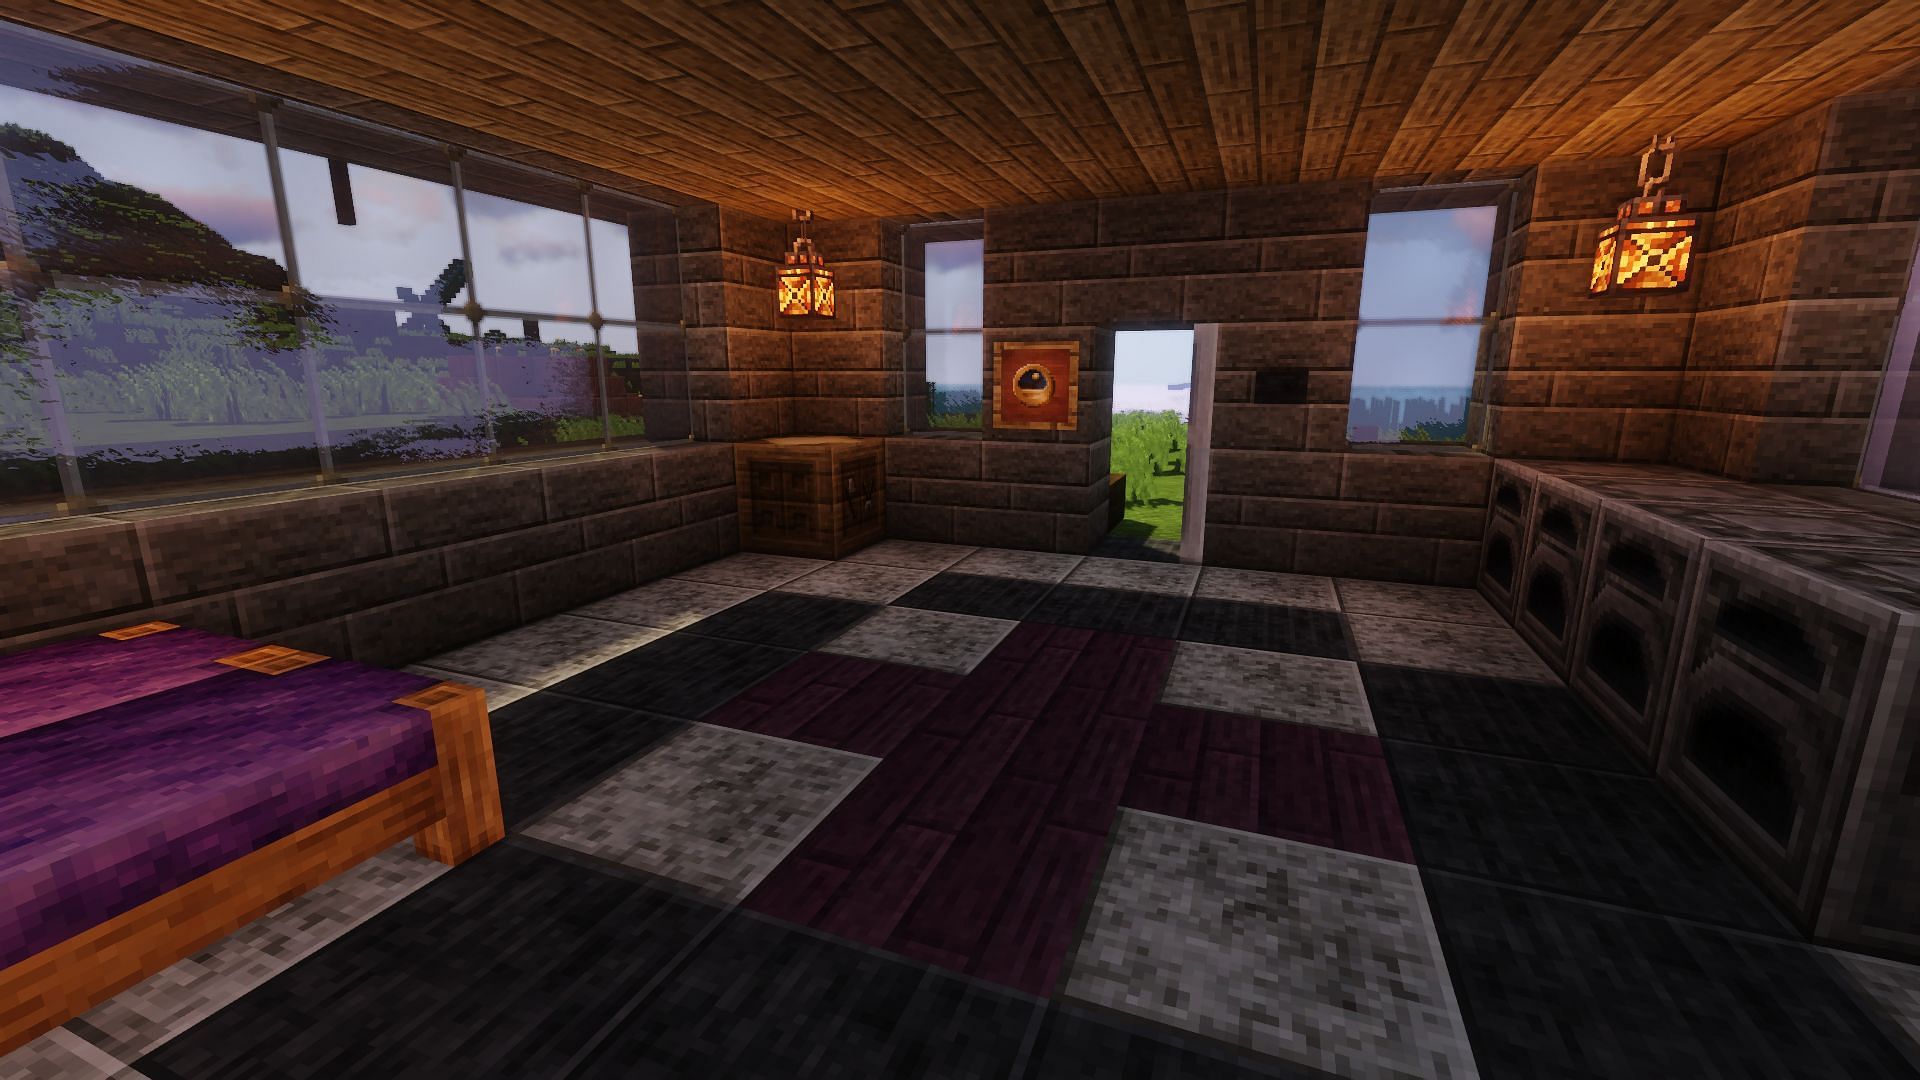 Clarity Resource Pack 1.20 / 1.19